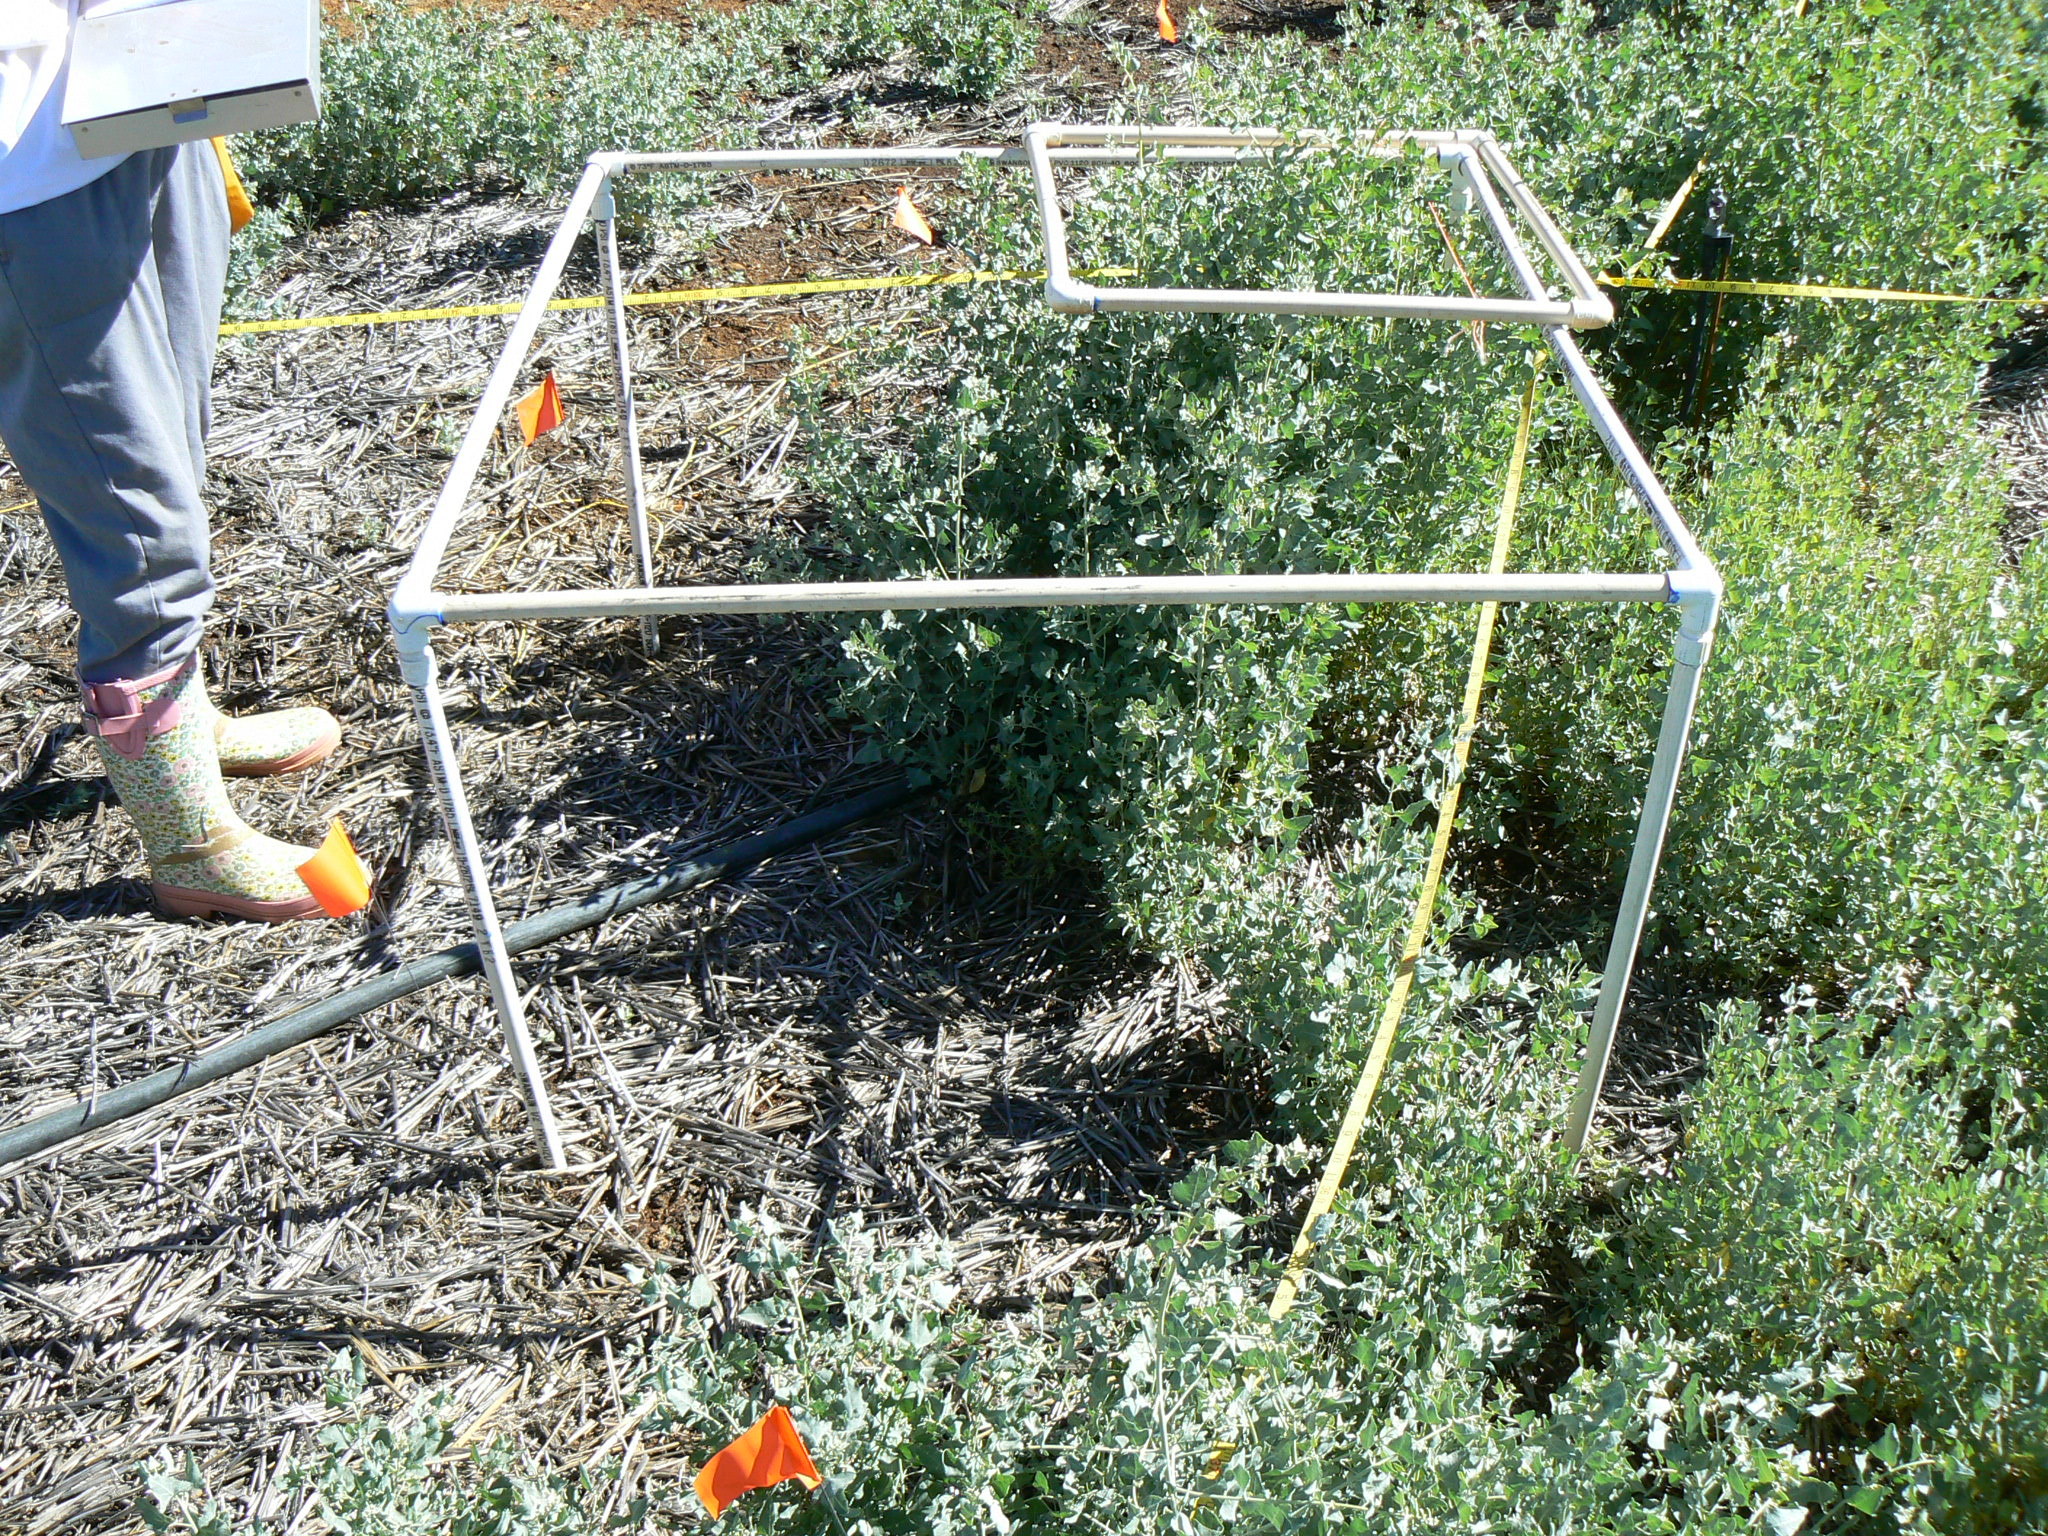 pvc frames used for estimated canopy cover of a 1 sq. m area